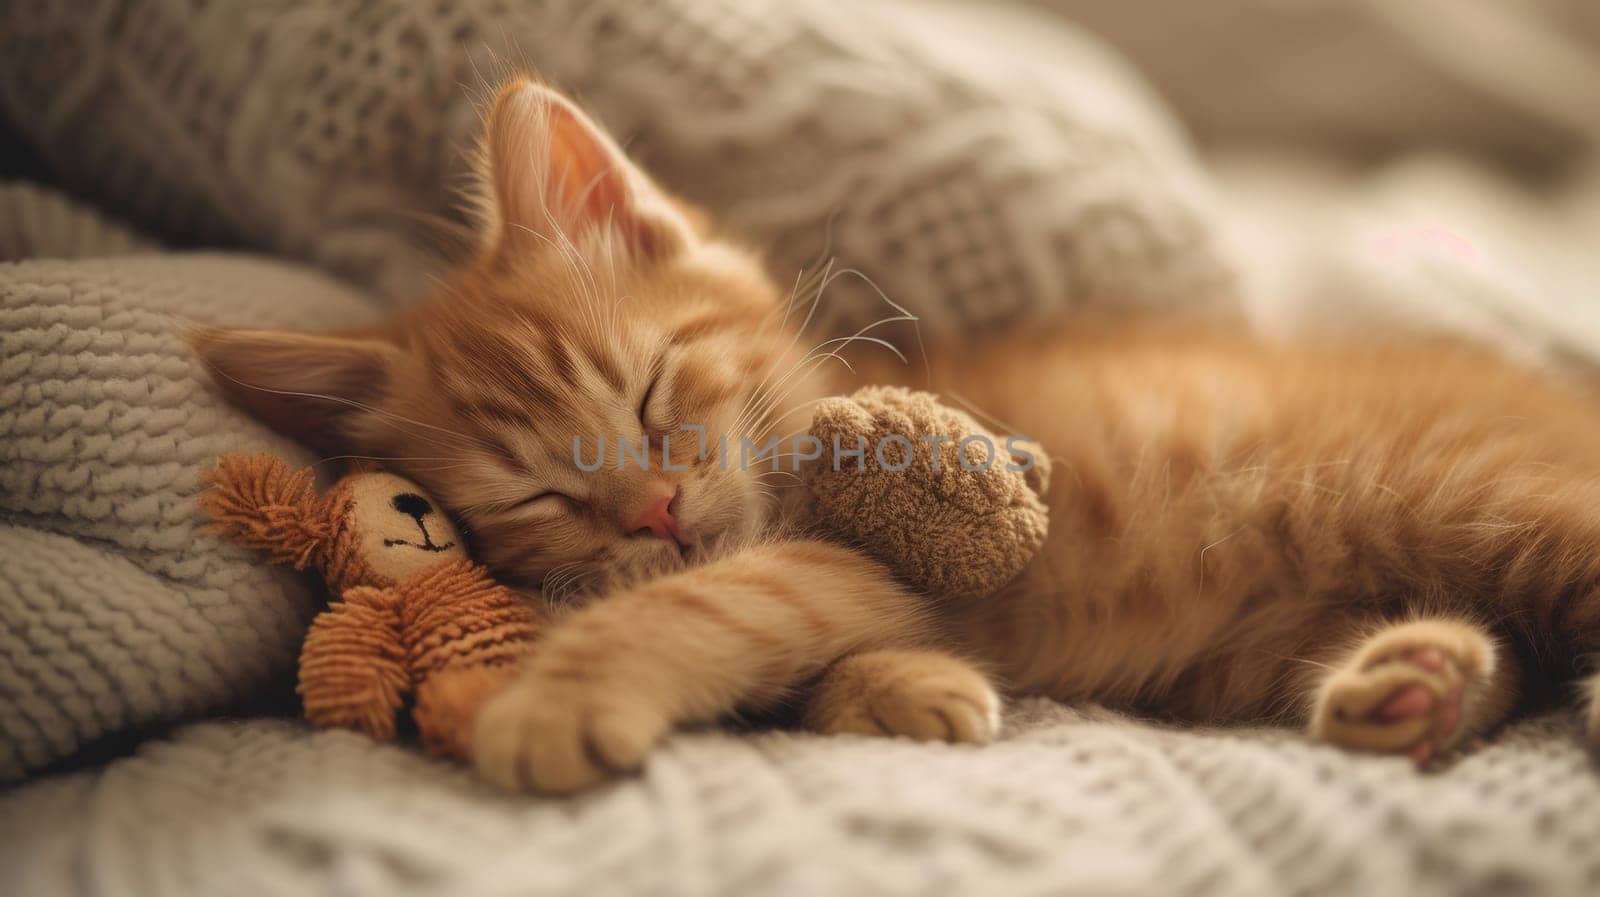 A kitten sleeping on a blanket with its teddy bear, AI by starush